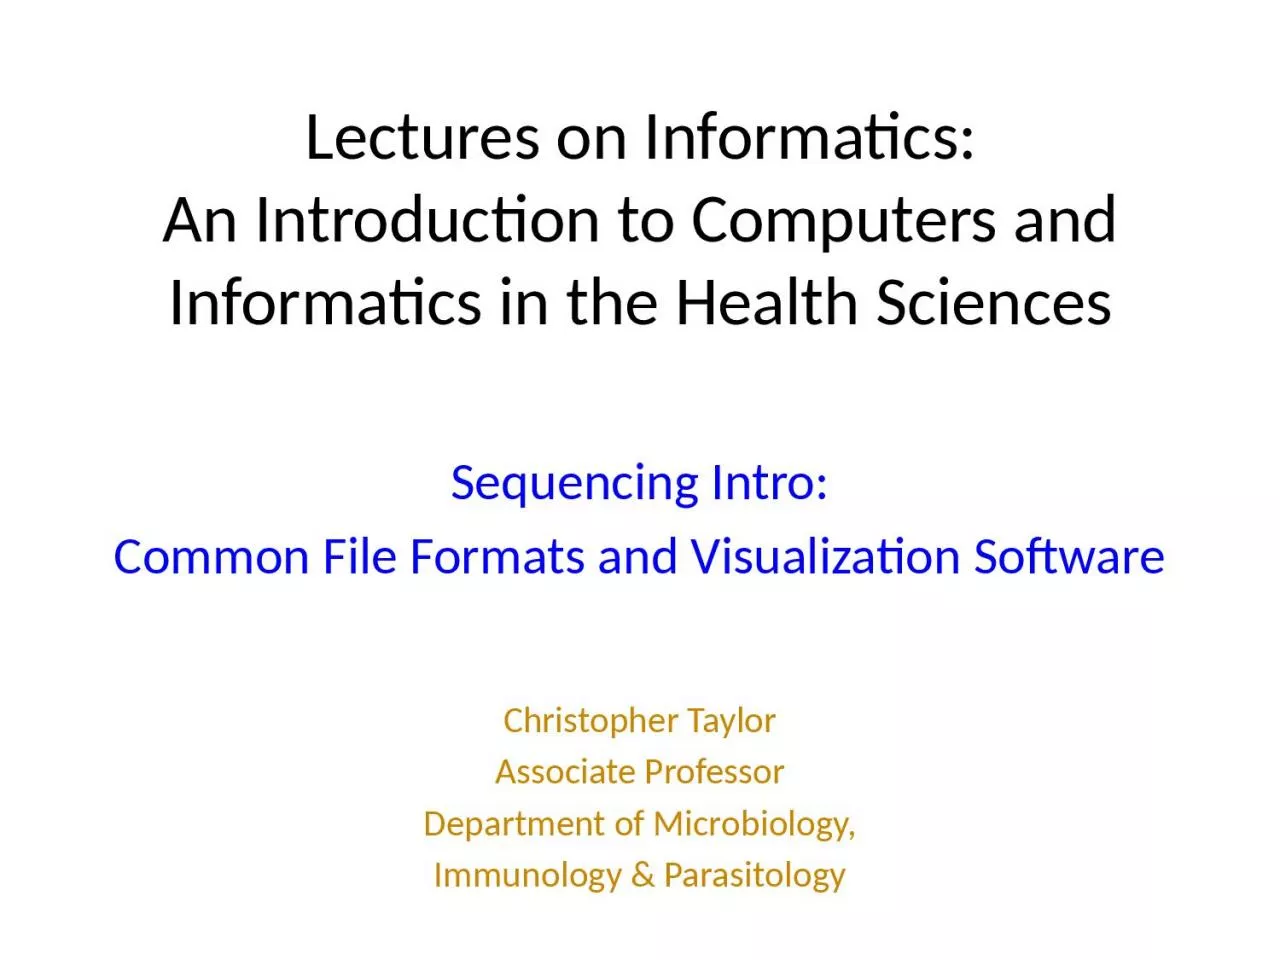 Lectures on Informatics: